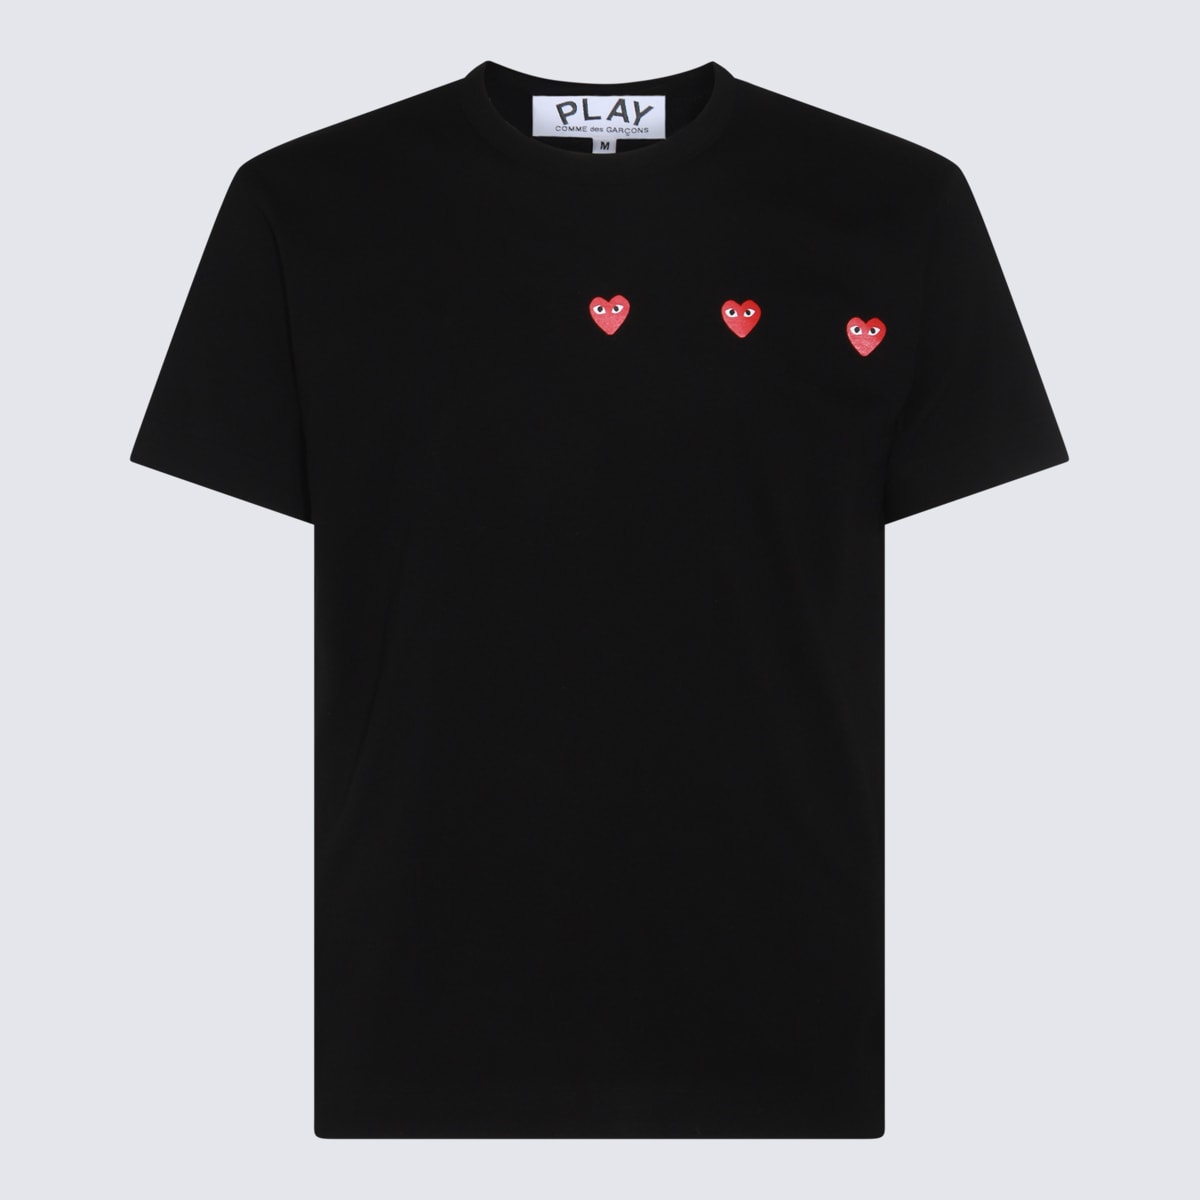 Comme des Garçons Play Black And Red Cotton Play T-shirt